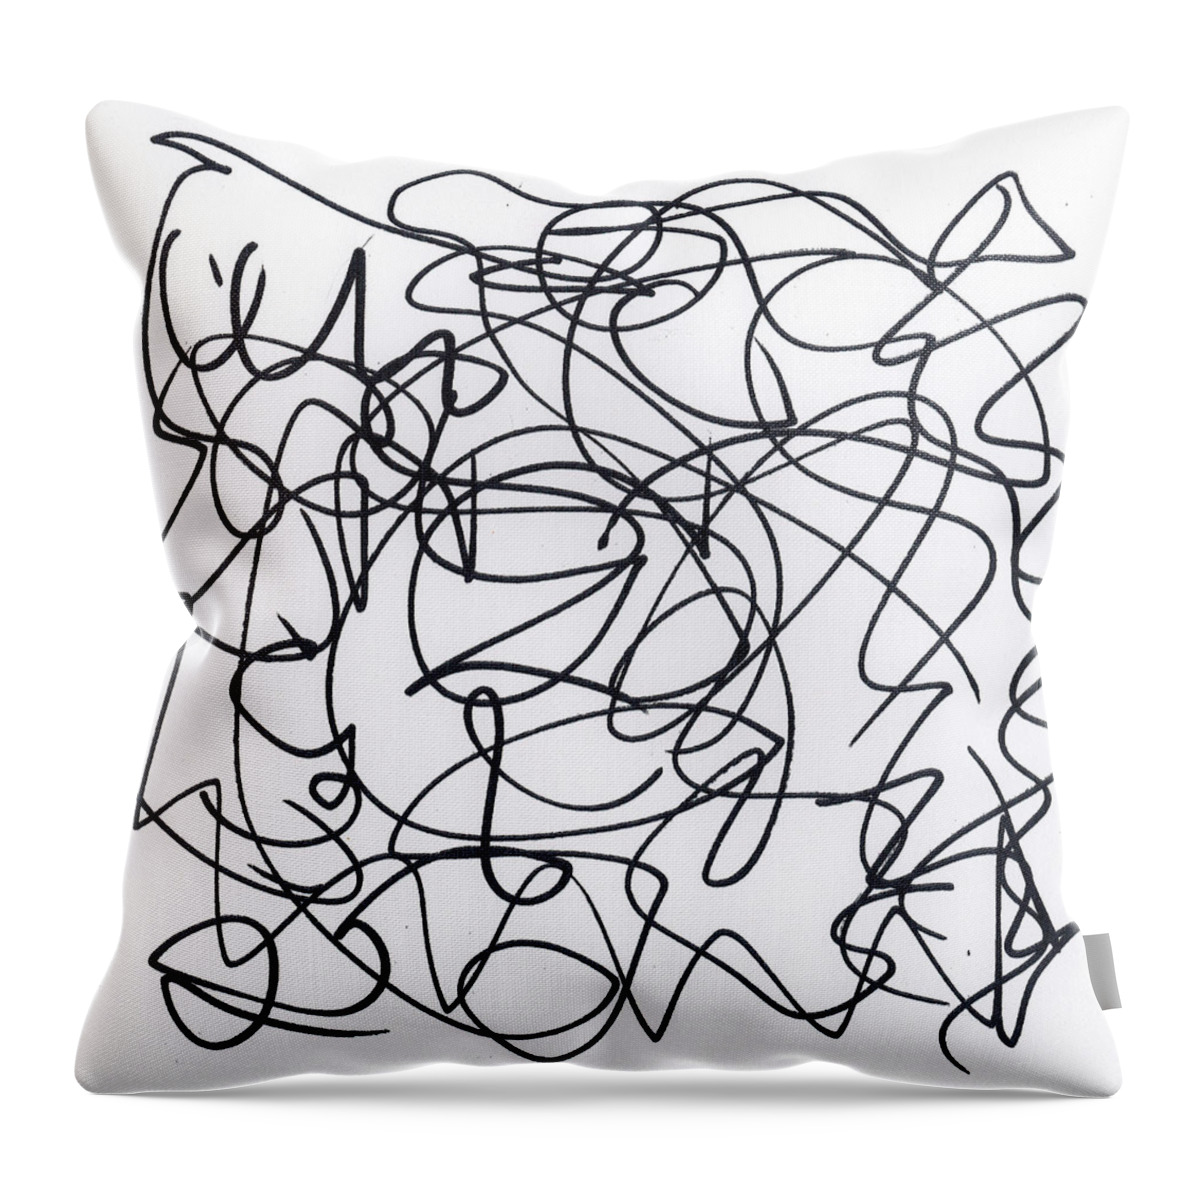 Abstract Throw Pillow featuring the drawing Scribble for 'Eavesdropping' #1 by Ismael Cavazos